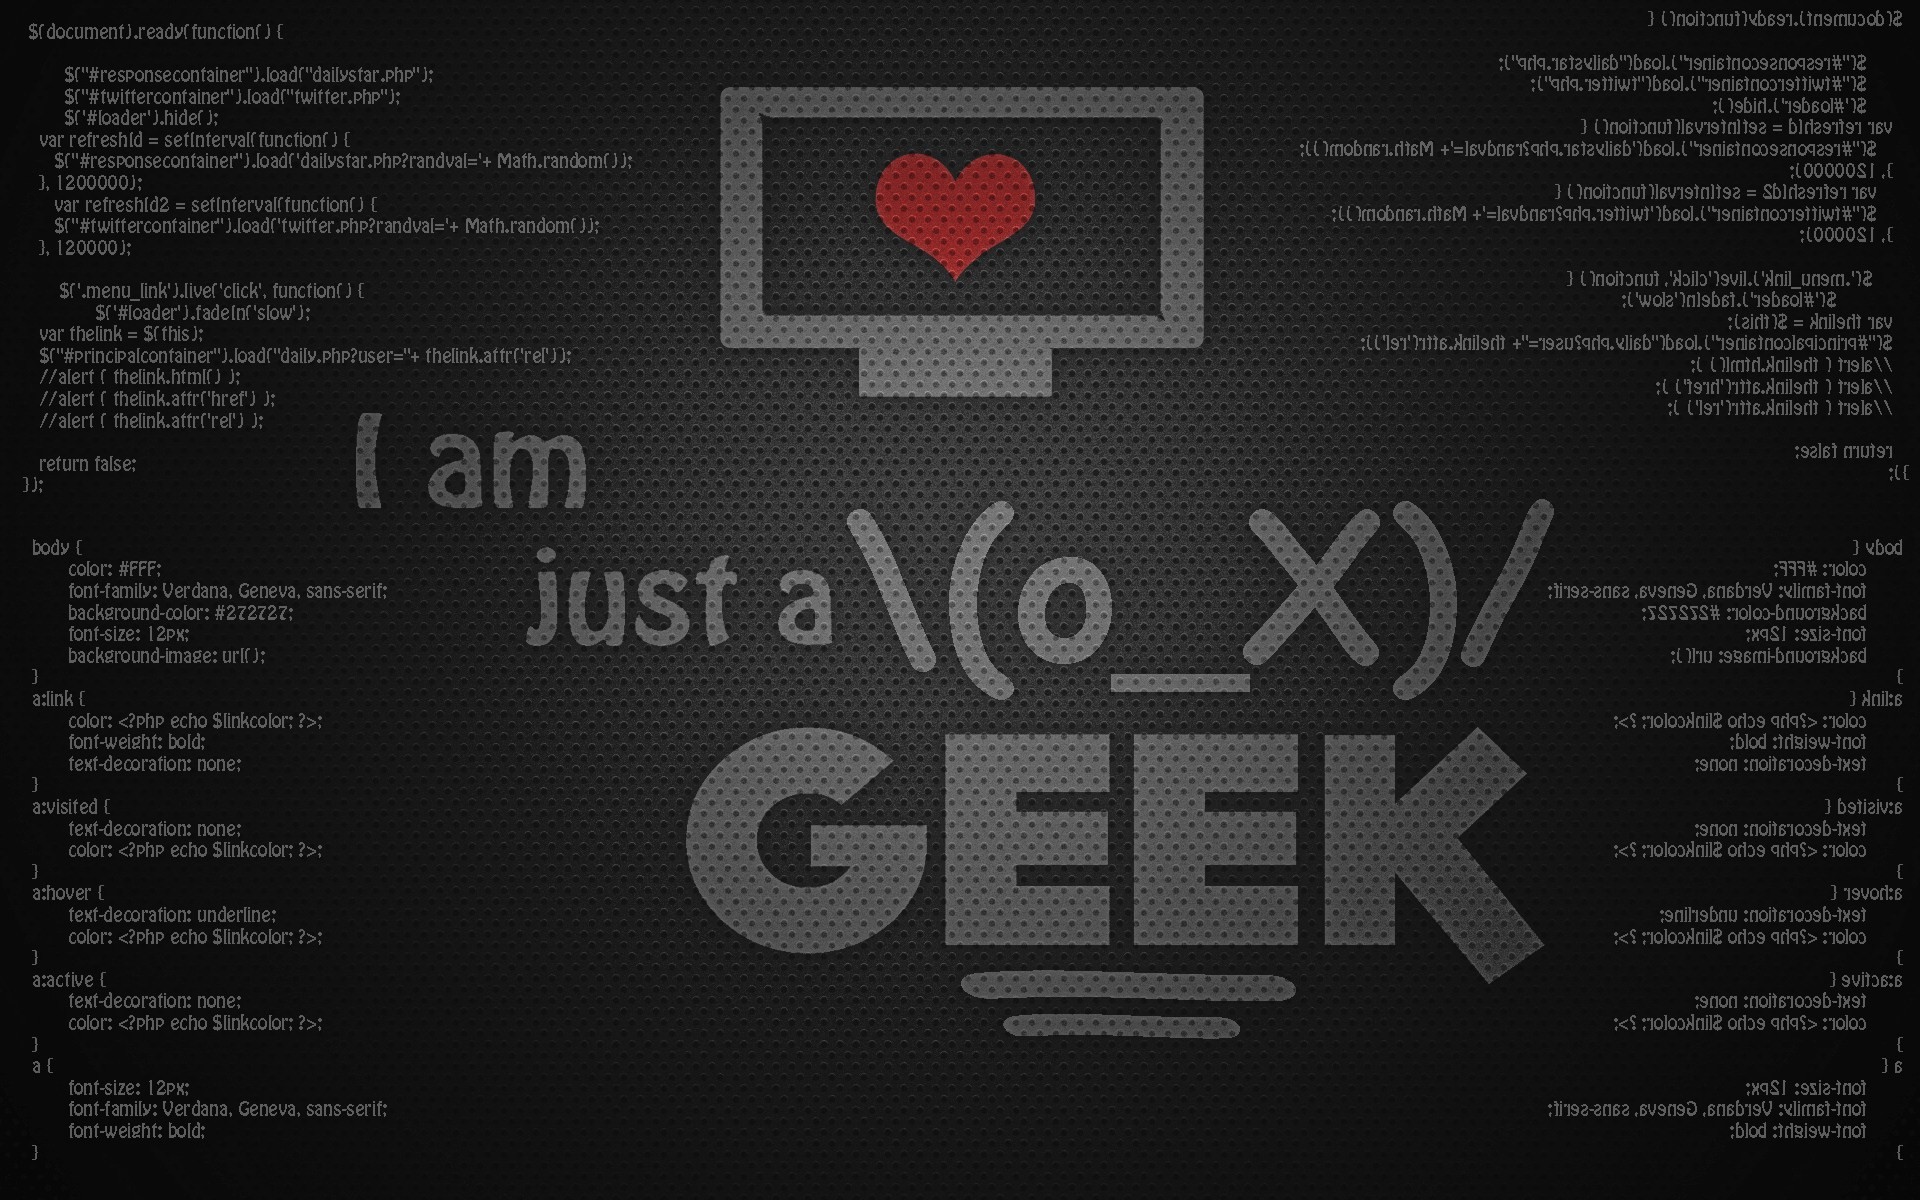 1920x1200 20+ Awesome Geek Wallpapers For All Geeks & Nerds - Stugon